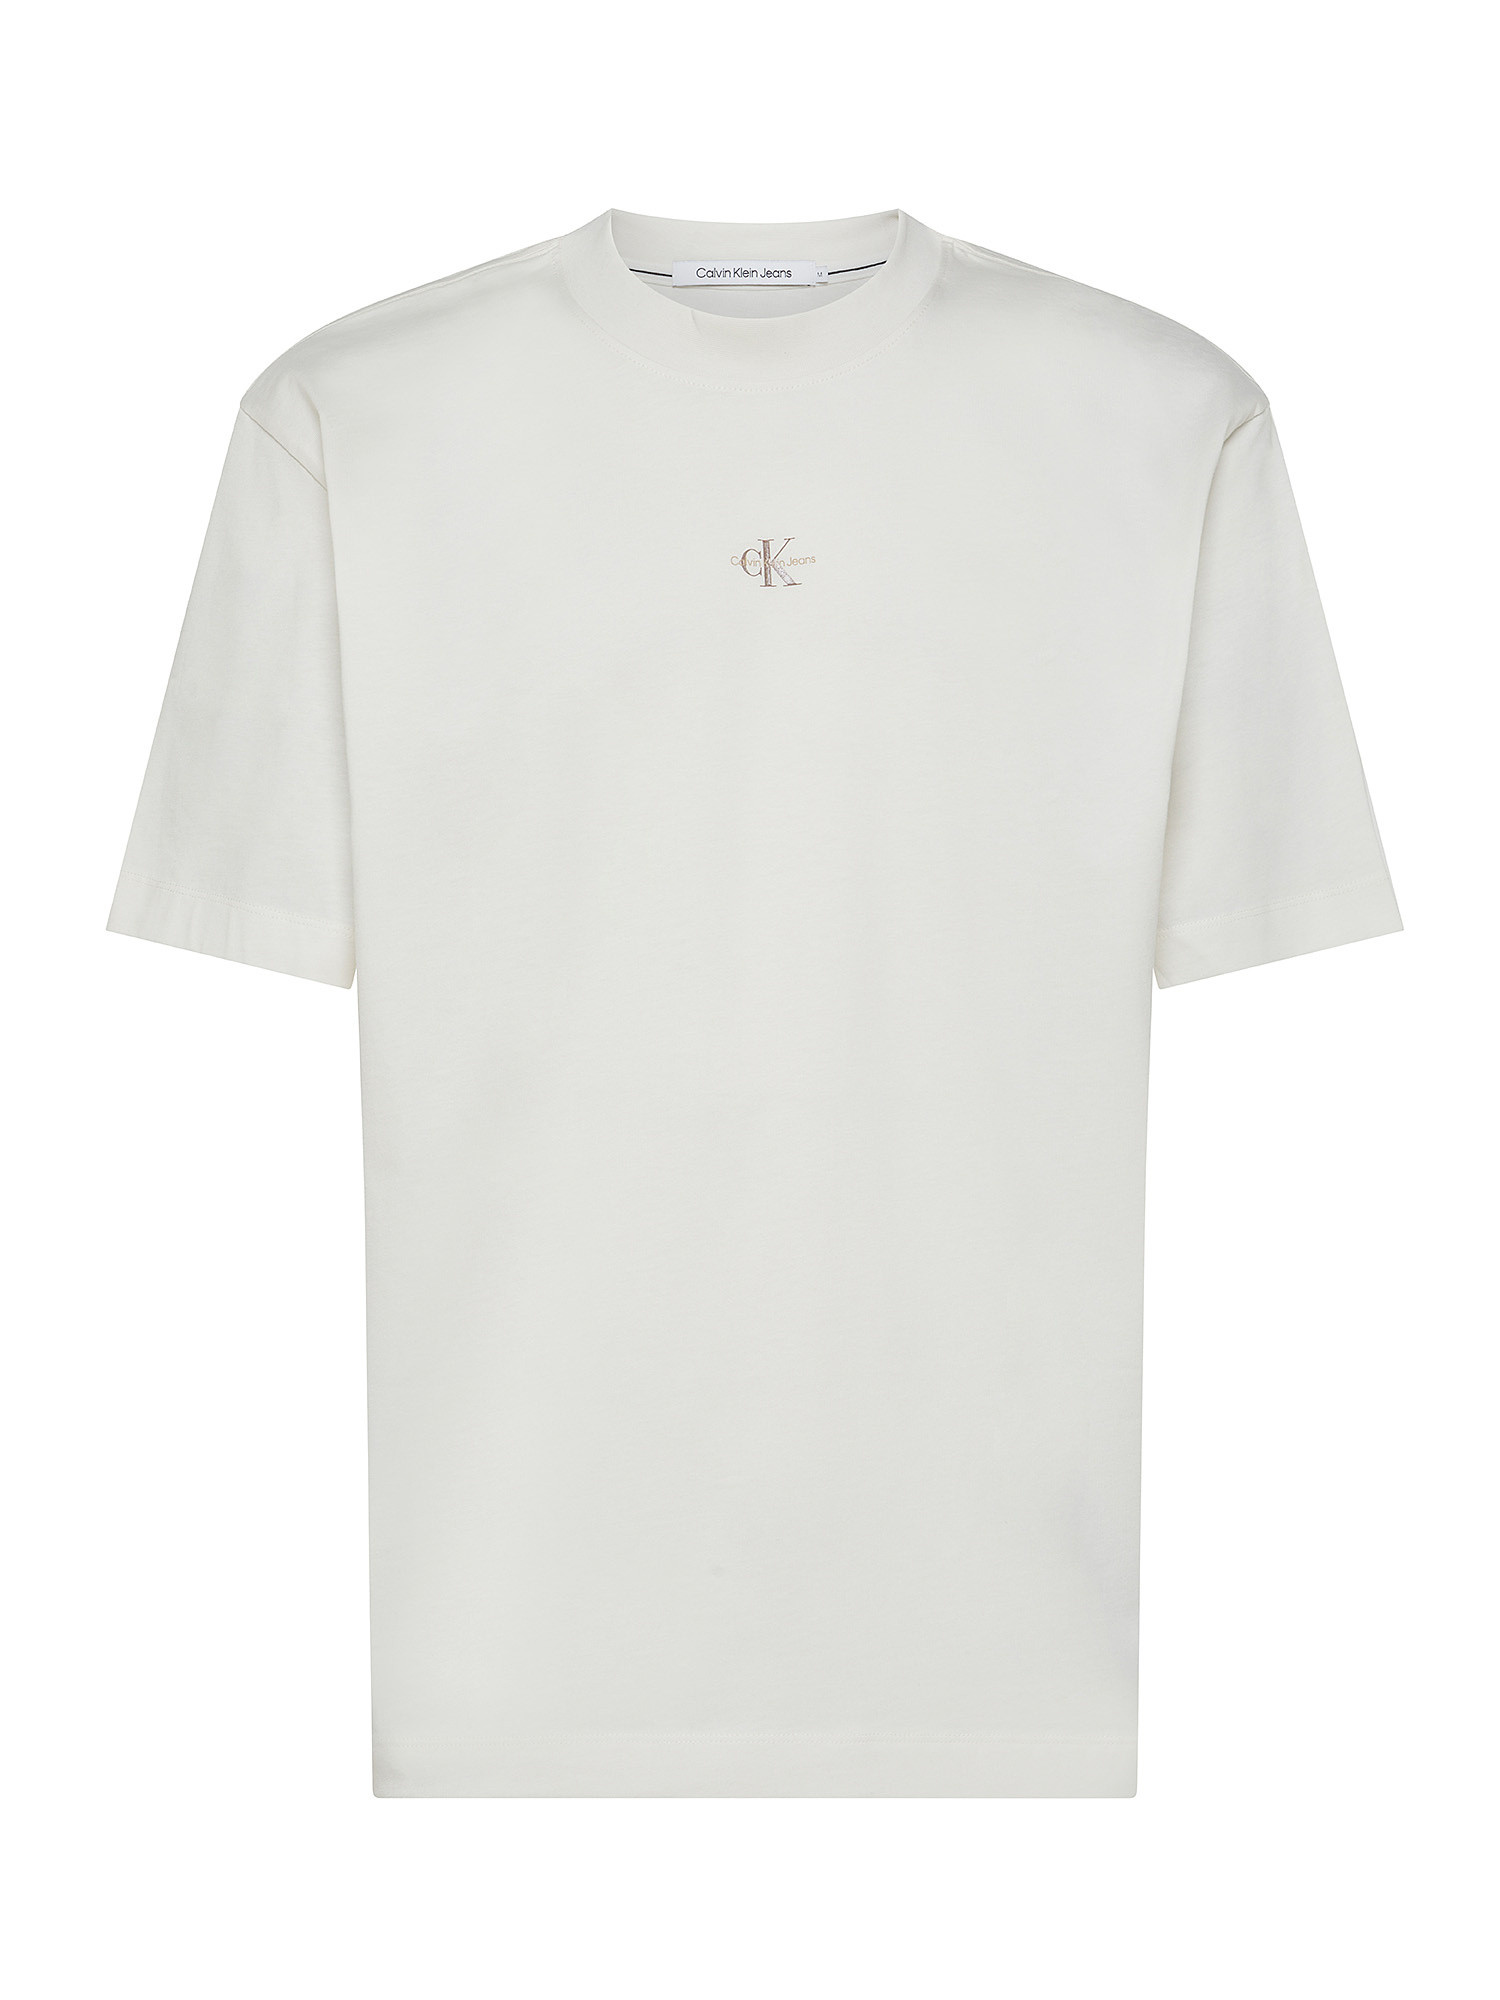 Calvin Klein Jeans - Relaxed fit T-shirt in organic cotton with logo, White, large image number 0